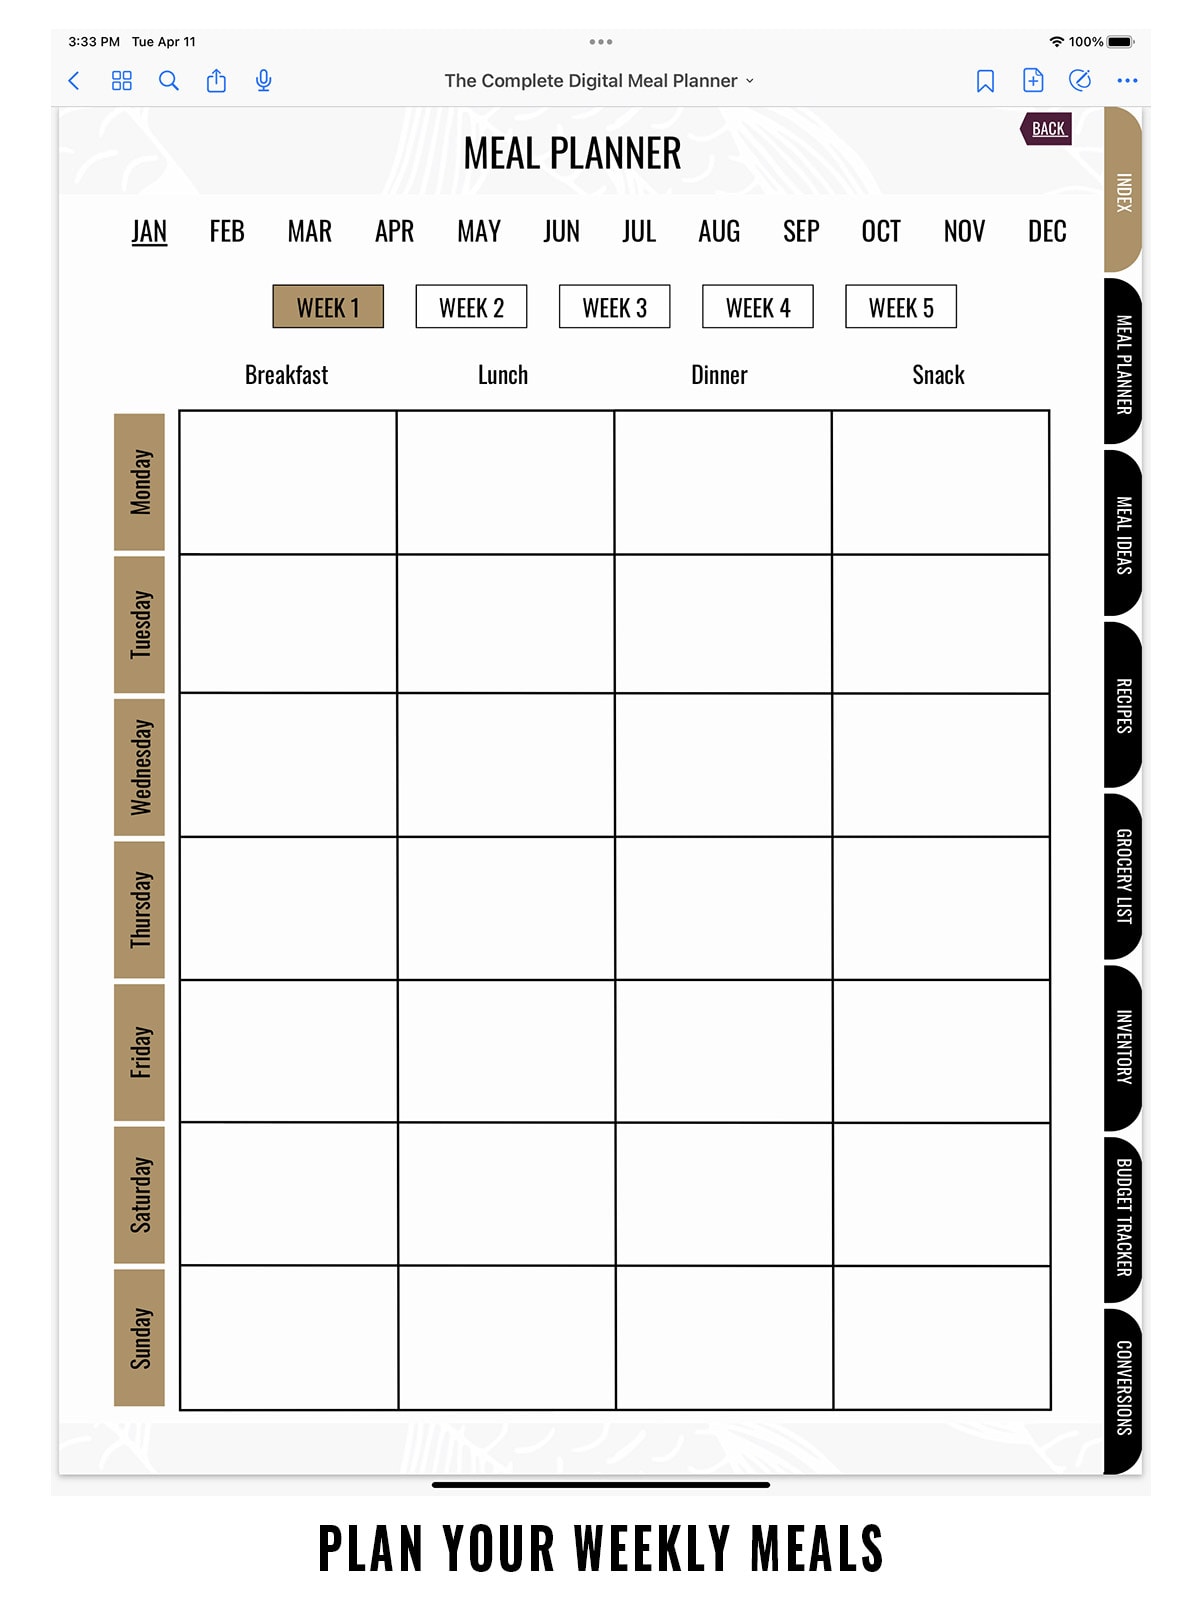 Meal plan page